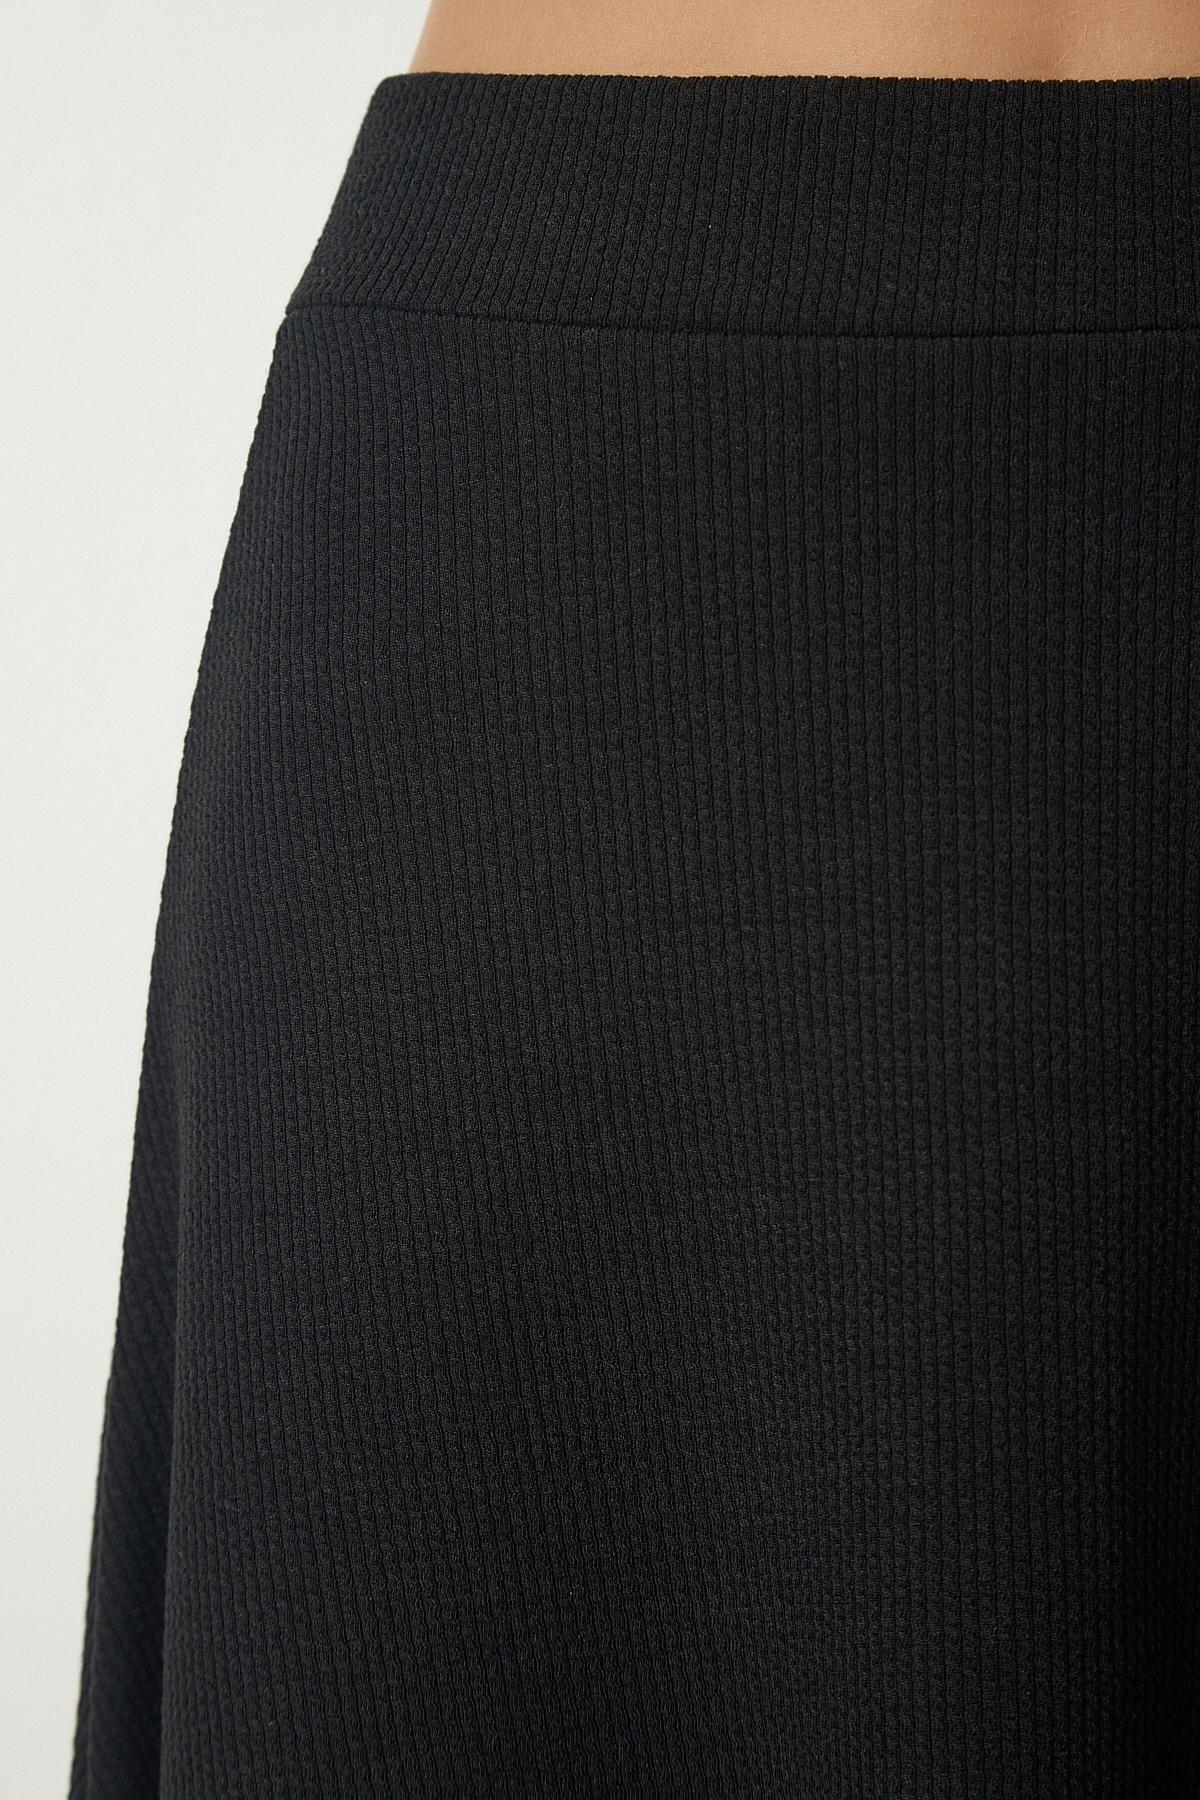 Happiness Istanbul - Black Asymmetrical Cut Corduroy Knitted Skirt